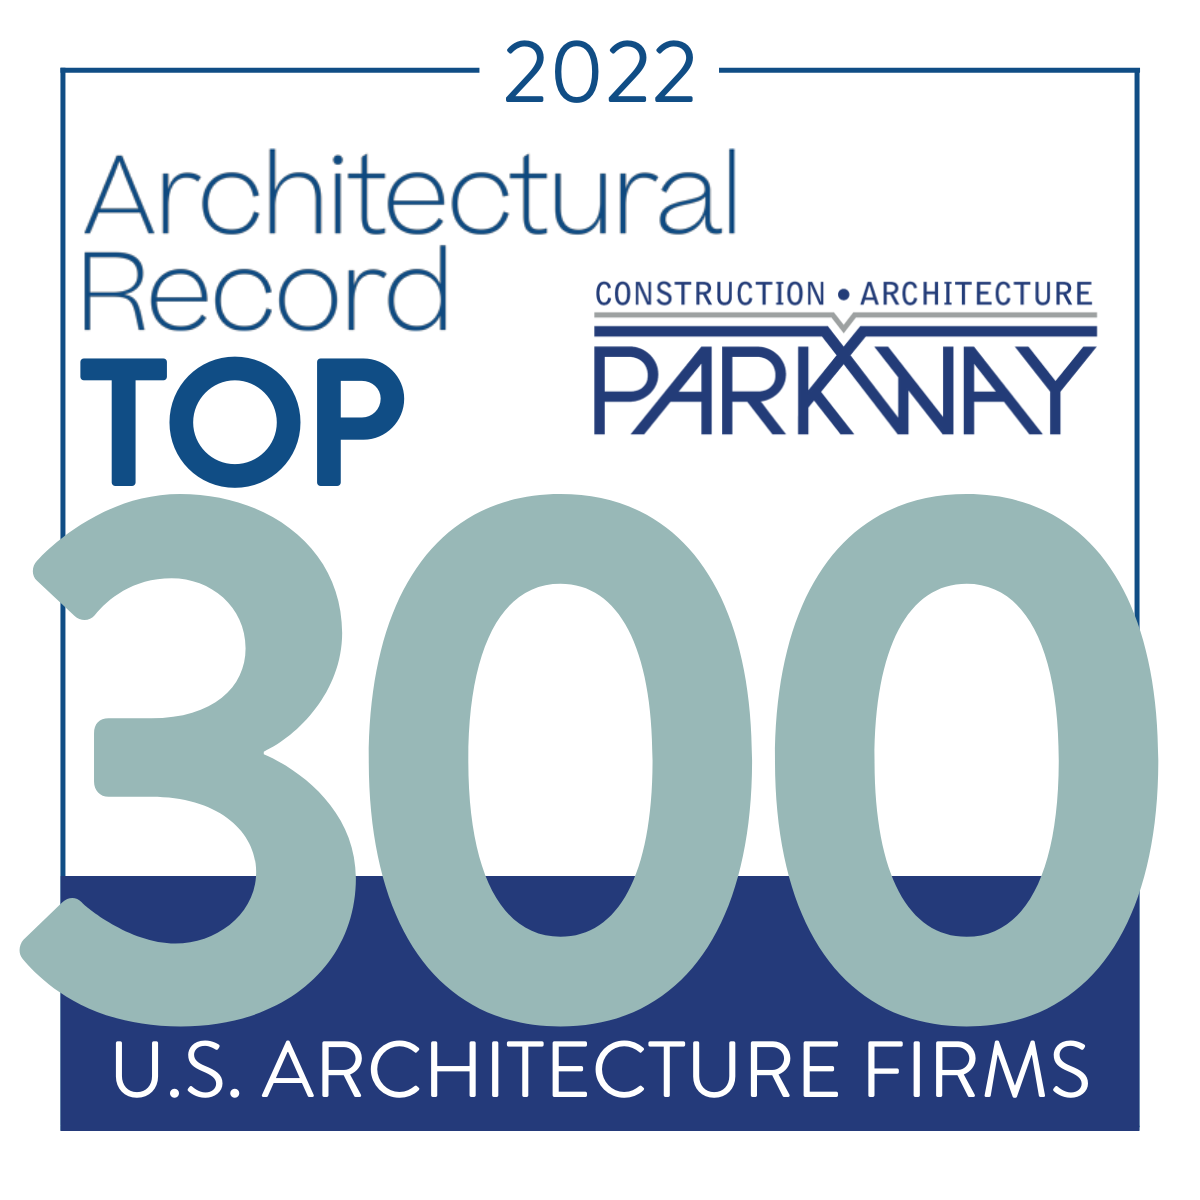 Parkway Named Top Architecture Firm